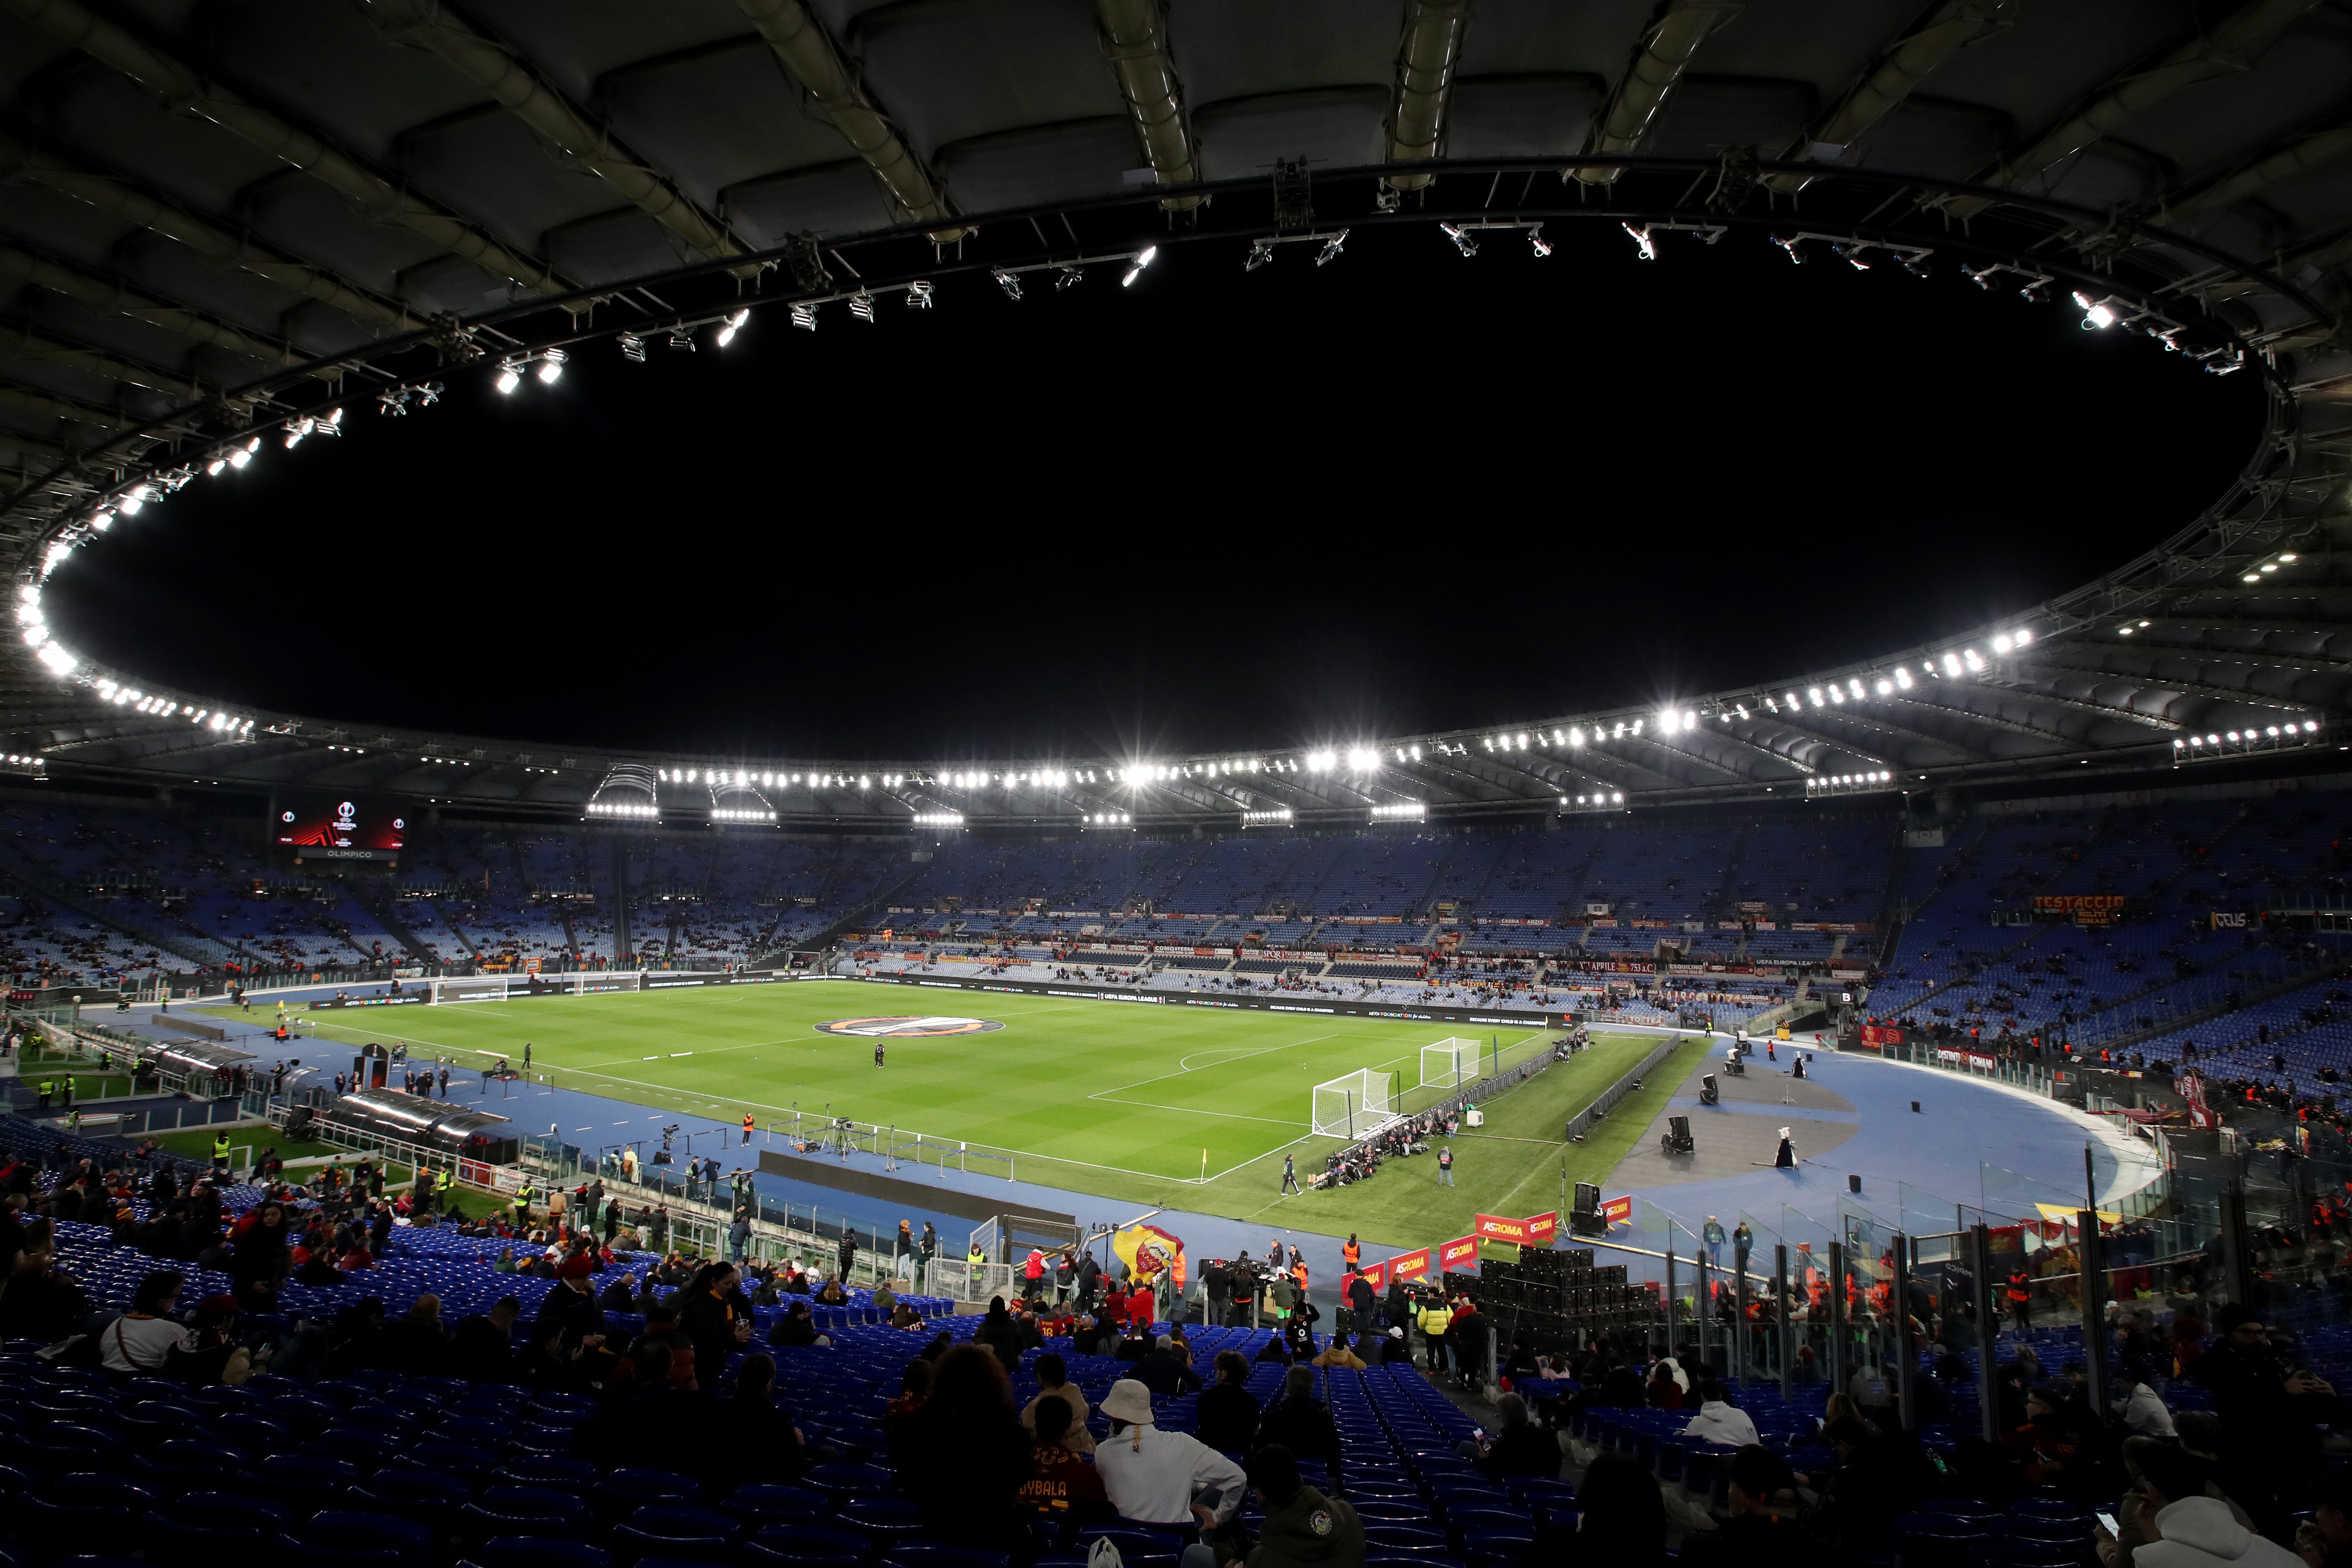 Two Brighton fans were stabbed ahead of the match against Roma at the Stadio Olimpico